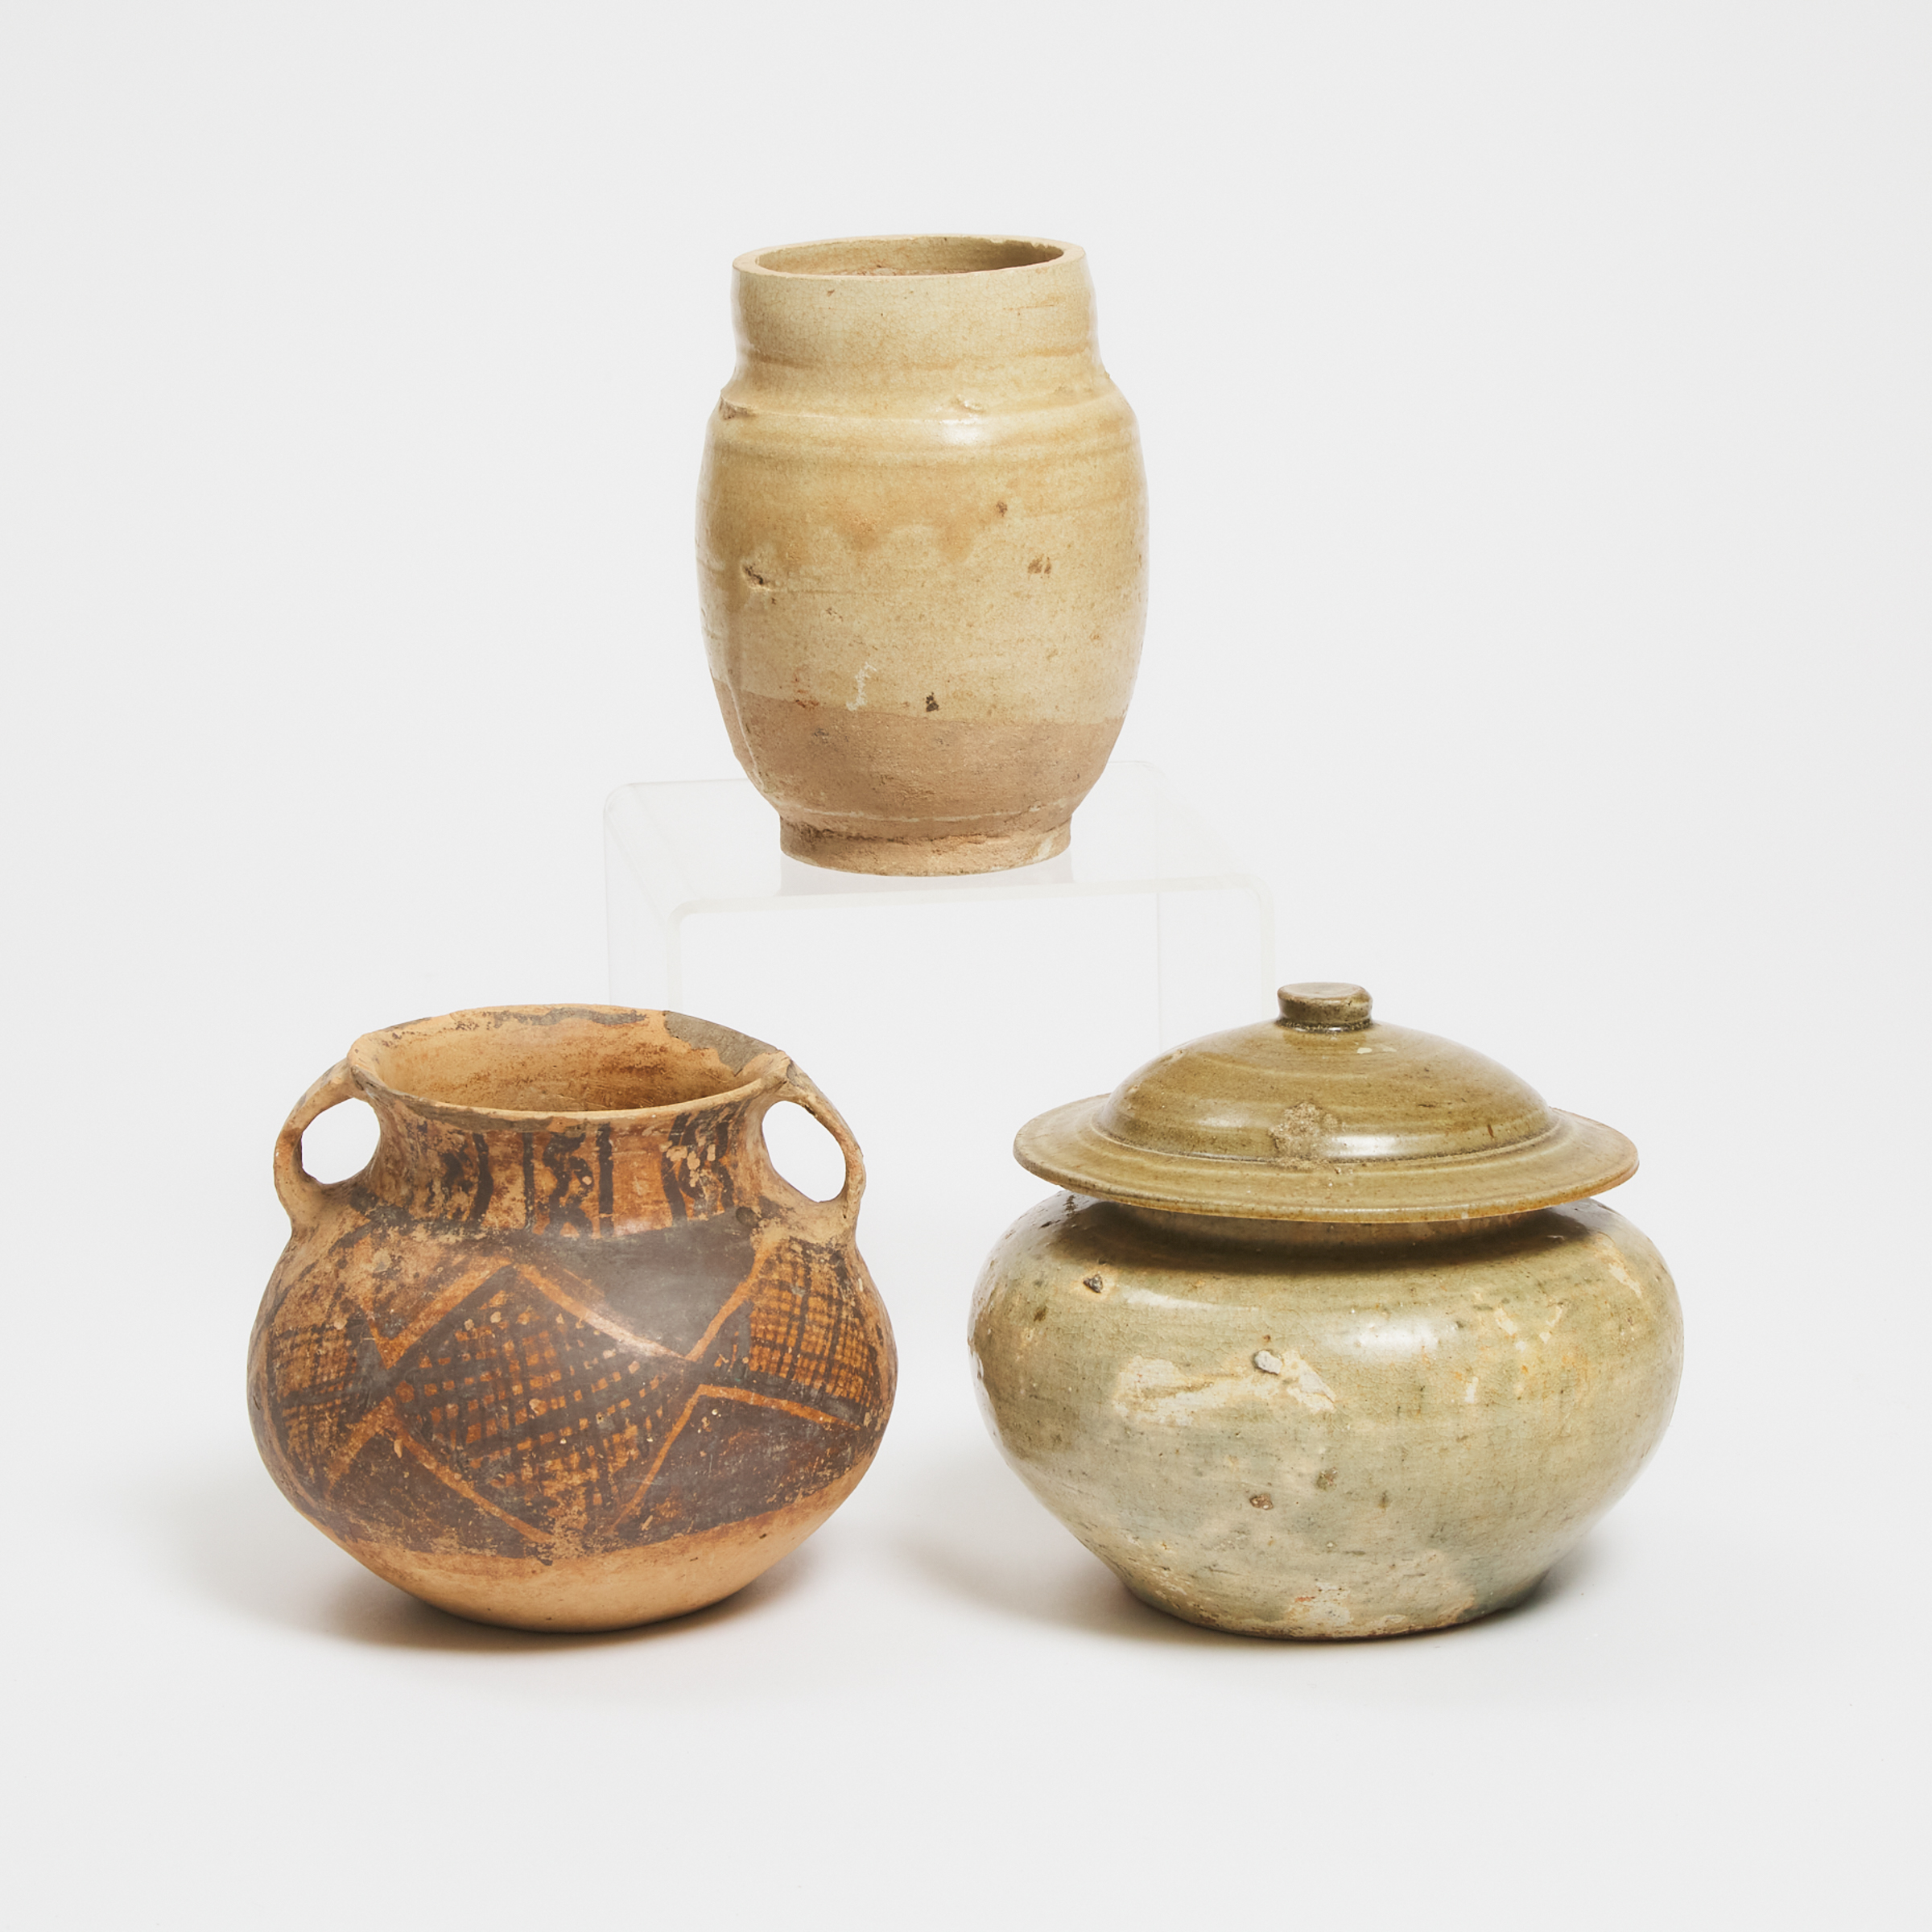 A Group of Three Chinese Pottery Vessels, Neolithic Period and Later